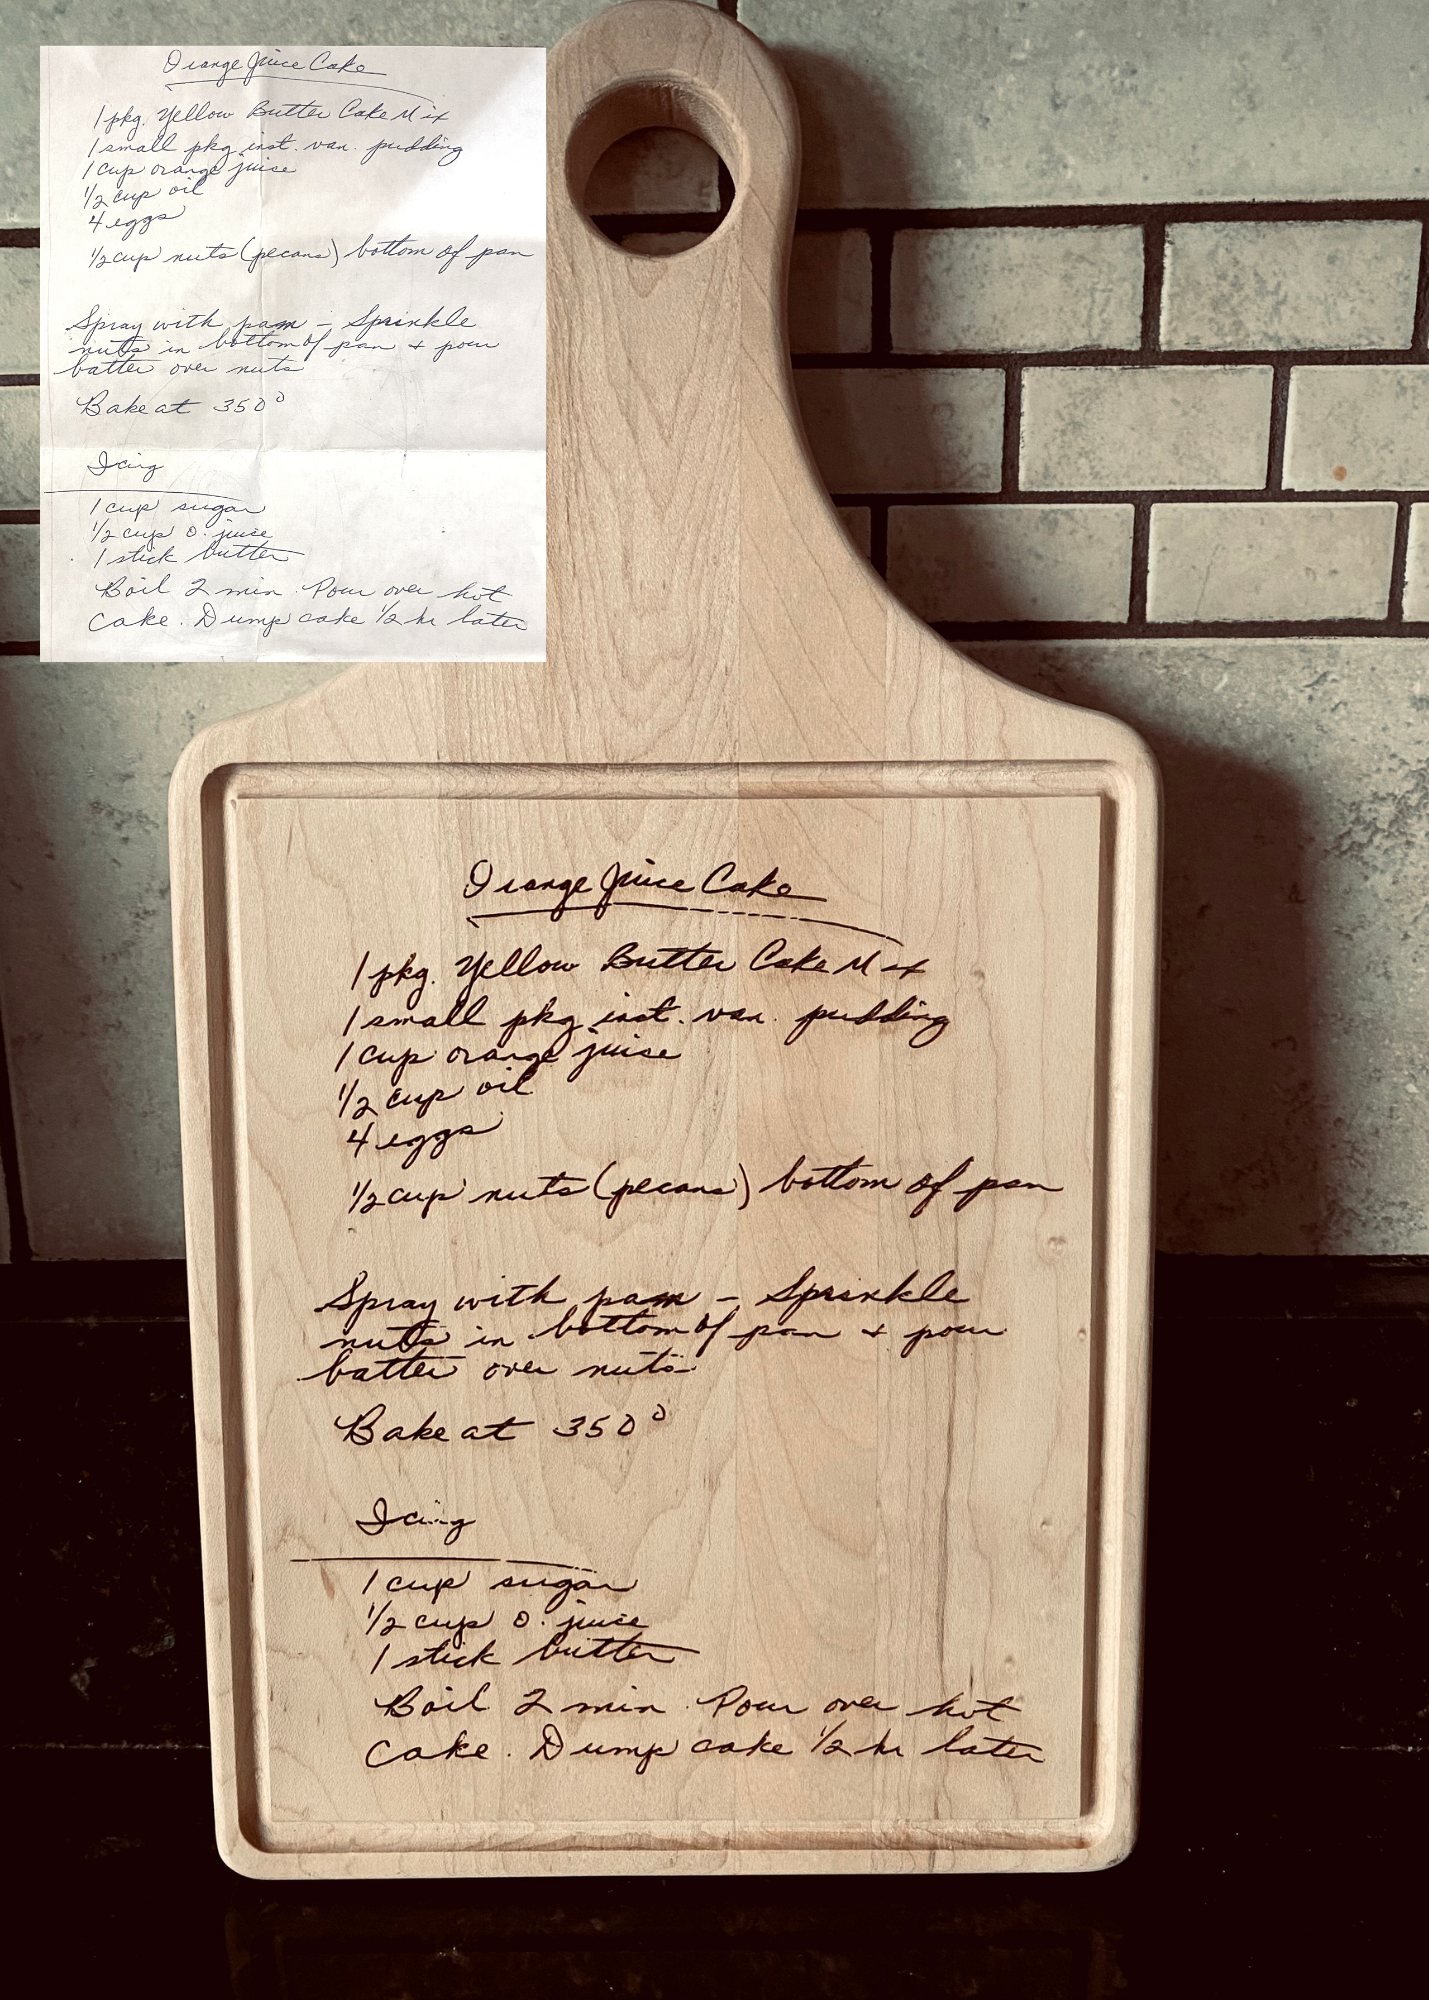 Upload Your Recipe Personalized Cutting Board with Custom Text